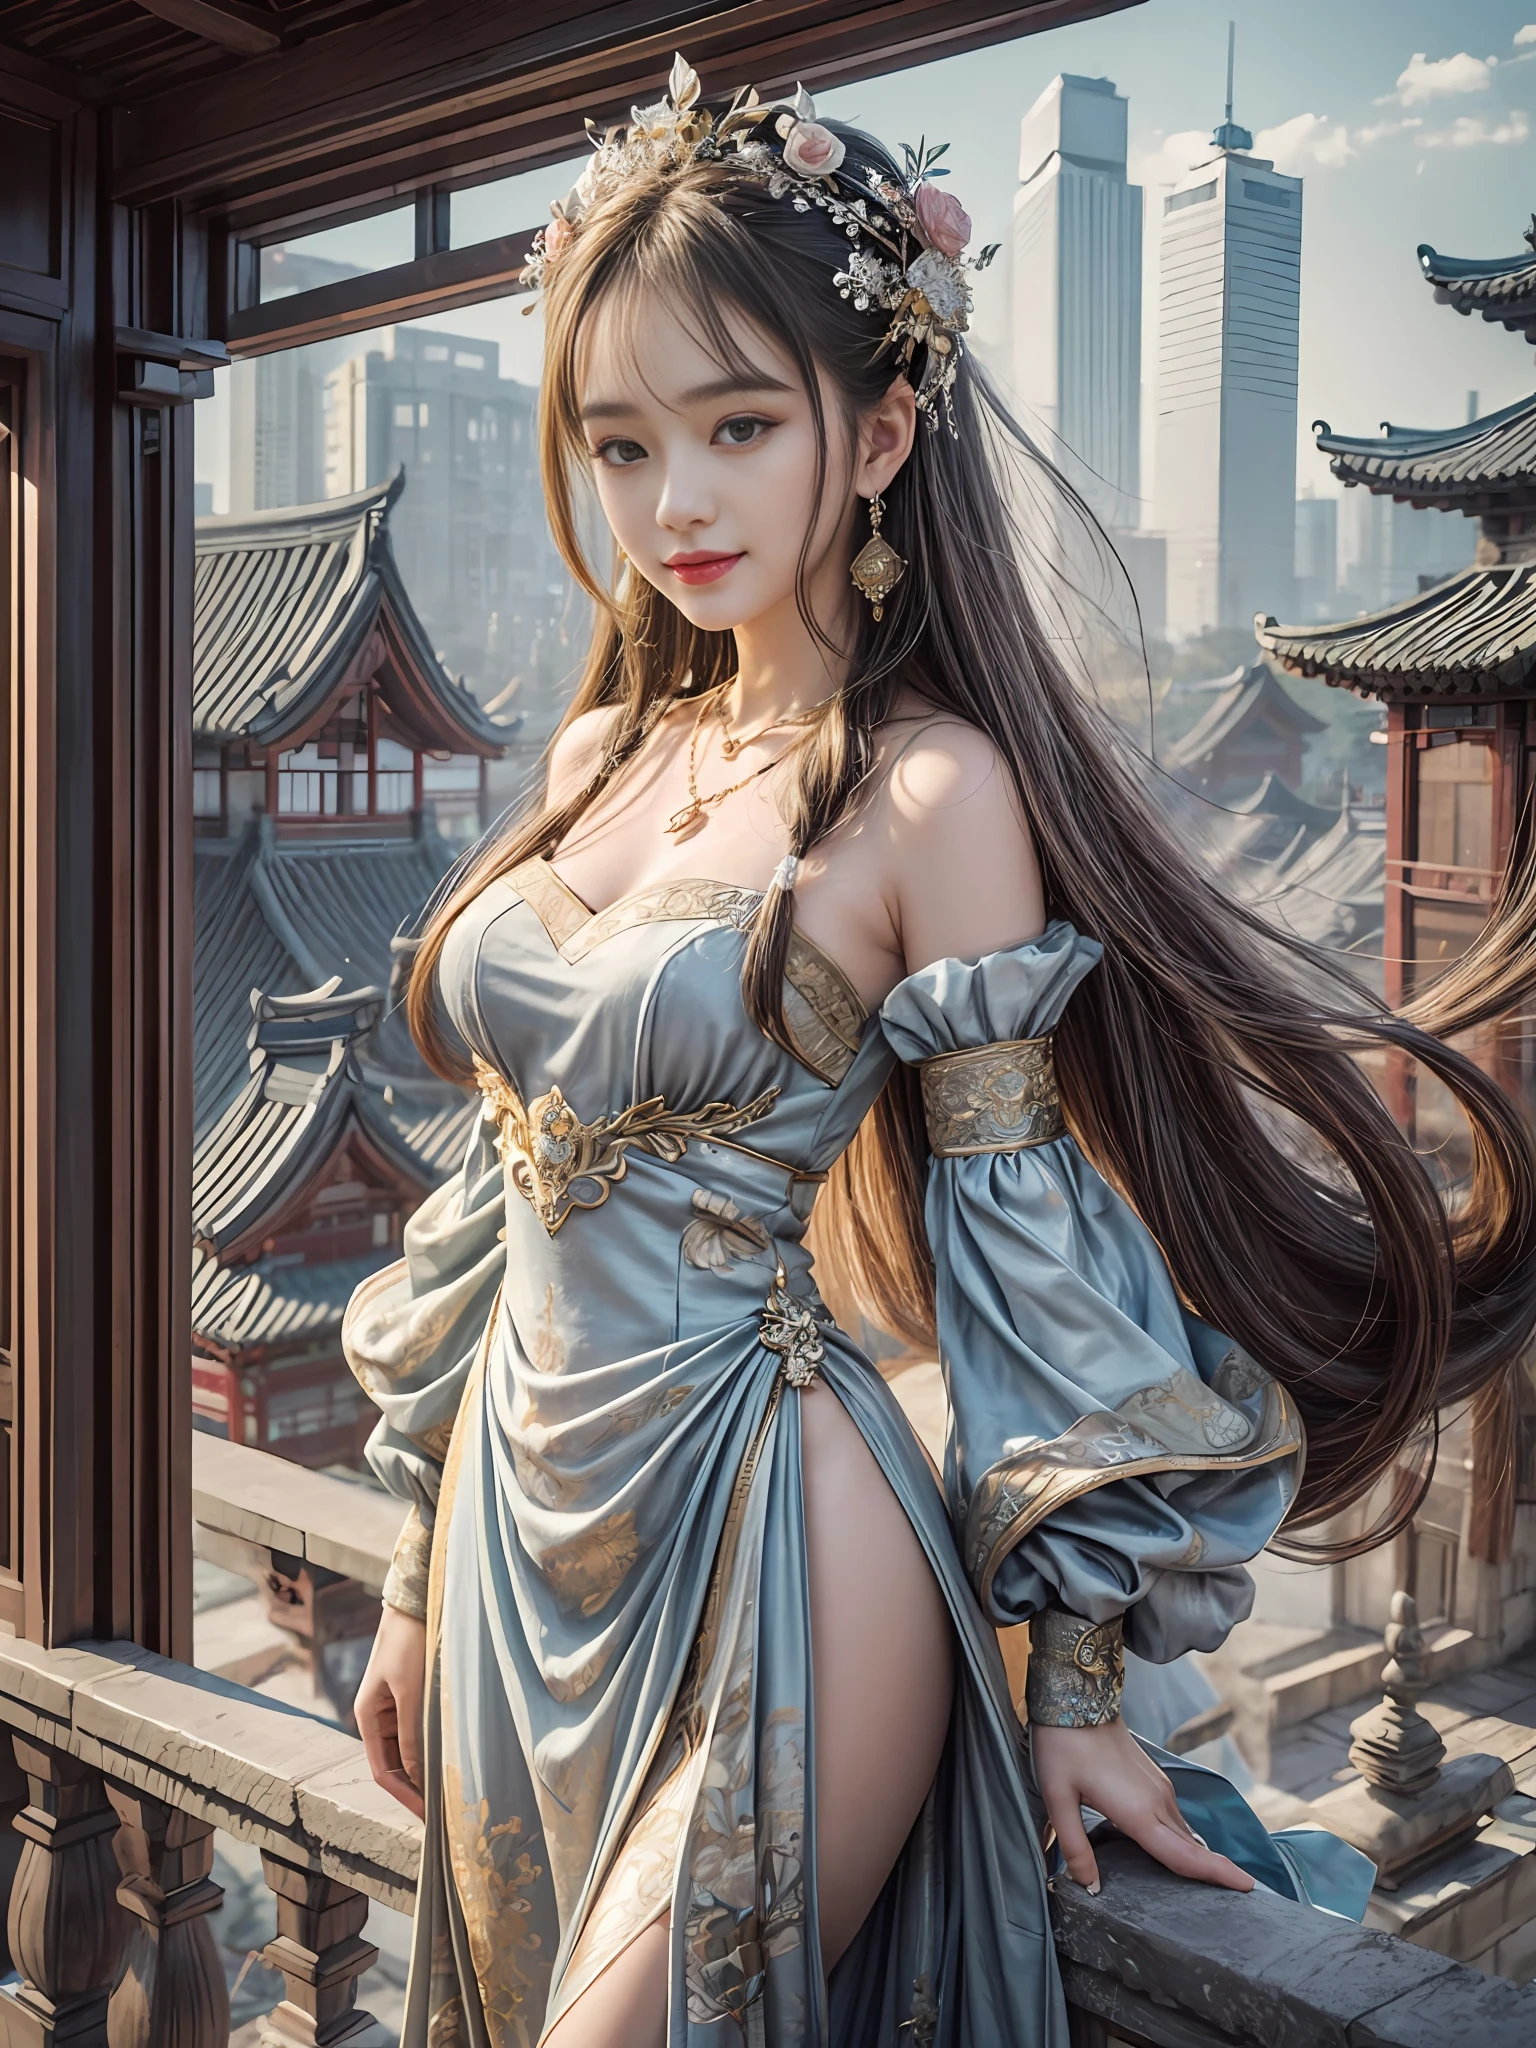 Best quality, masterpiece, high resolution, 1girl, porcelain, beautiful face, hair accessory, solo, looking at viewer, smiling, shut up, lips, porcelain, dress, hair accessory, necklace, jewelry, long hair, earrings, Hanfu, architecture, East Asian architecture, architecture, outdoors, roof, city, cityscape